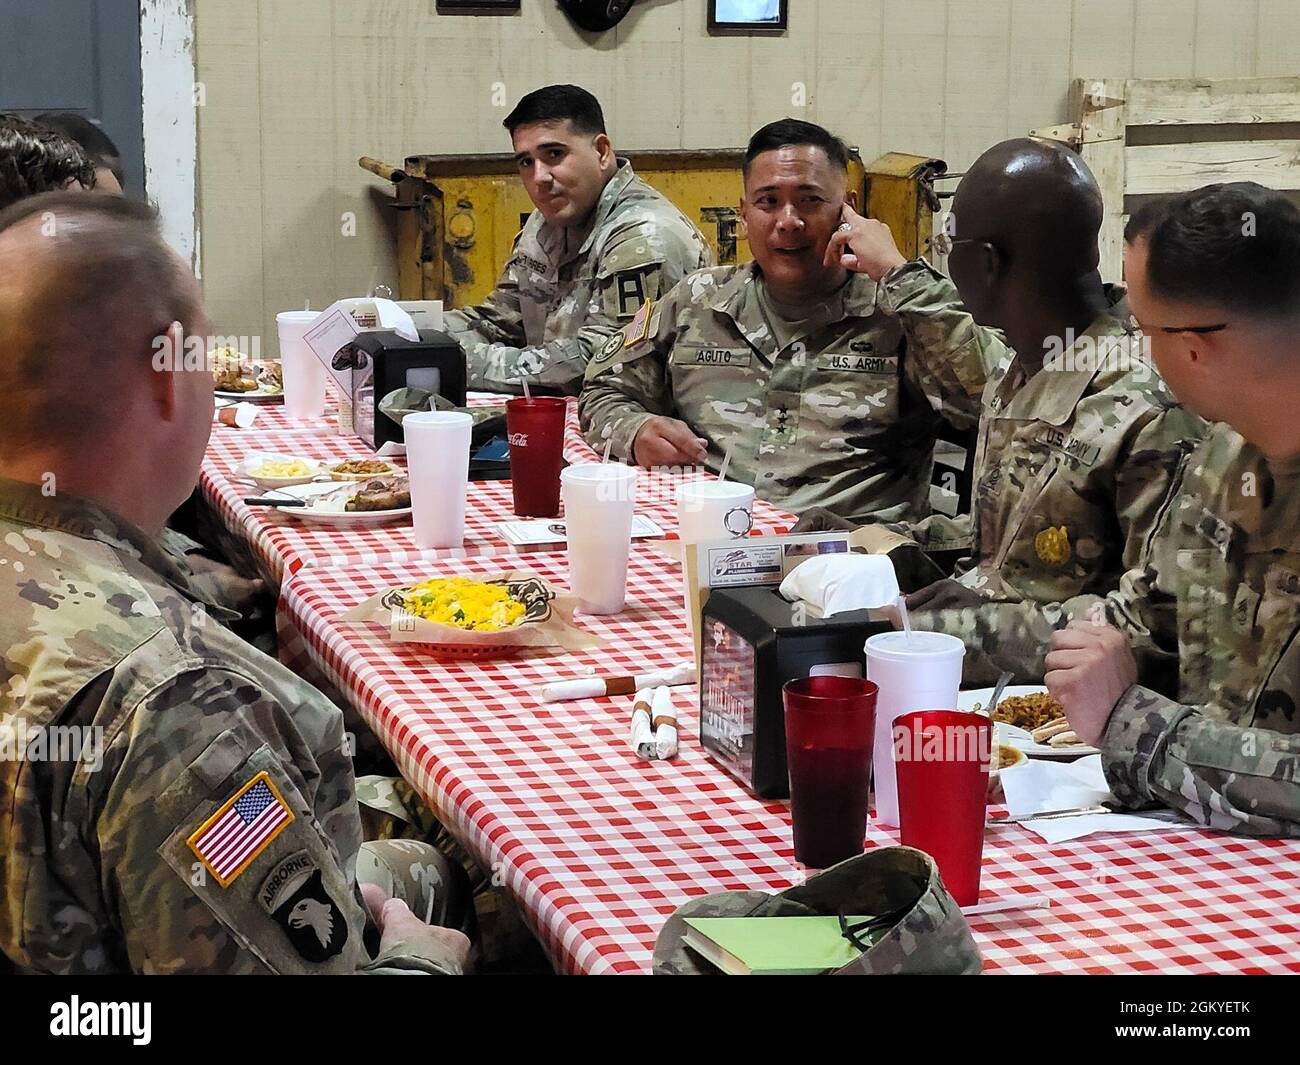 Lt. Gen. Antonio A. Aguto, commanding general of First Army (center-right), meets with OC/Ts from 120th Infantry Brigade and 166th Aviation Brigade over a lunch at Barebones BBQ restaurant in Gatesville, Texas on July 28, 2021. Topics discussed included the commanding general's interest in the daily work of the OC/Ts, Soldier welfare, and shared Army training stories. Stock Photo